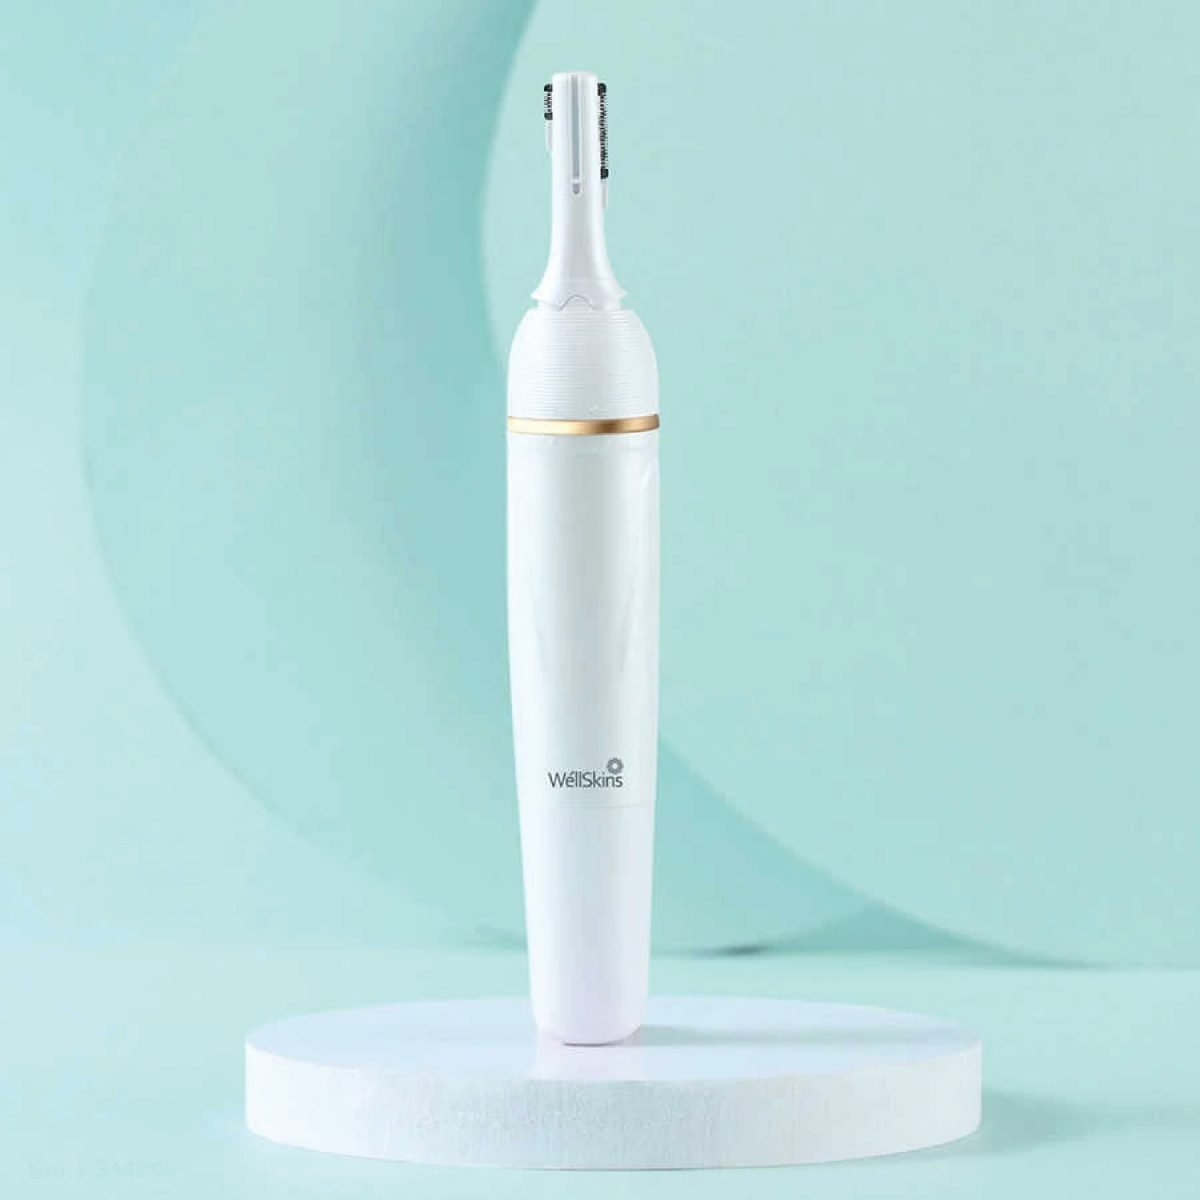 T3 01 Xiaomi Xiao Mi Youpin Wéllskins Electric Trimmer Repairer Shaver Body Hair Removal With Pivoting Head 30° Adjustable Cutter Head Hair Remover For Women Painless Lady Shaver 6-In-1 Https://Www.youtube.com/Watch?V=N-Wn12U3Uj4 Xiaomi Wellskins Wx-Tm01 Personal Beauty Trimmer